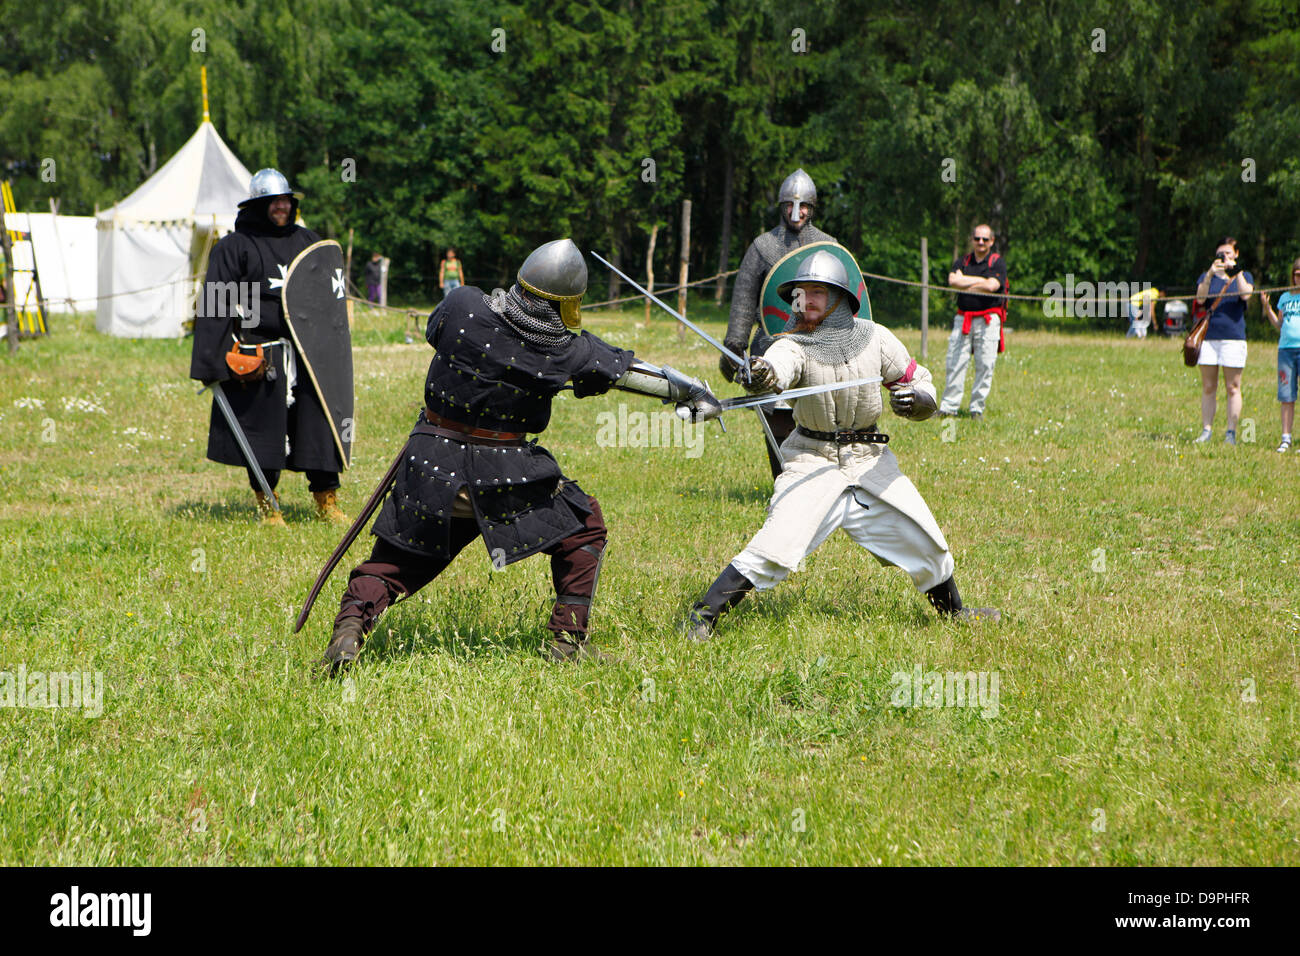 Two medieval european knights armed and fashioned fighting on a battle field Stock Photo